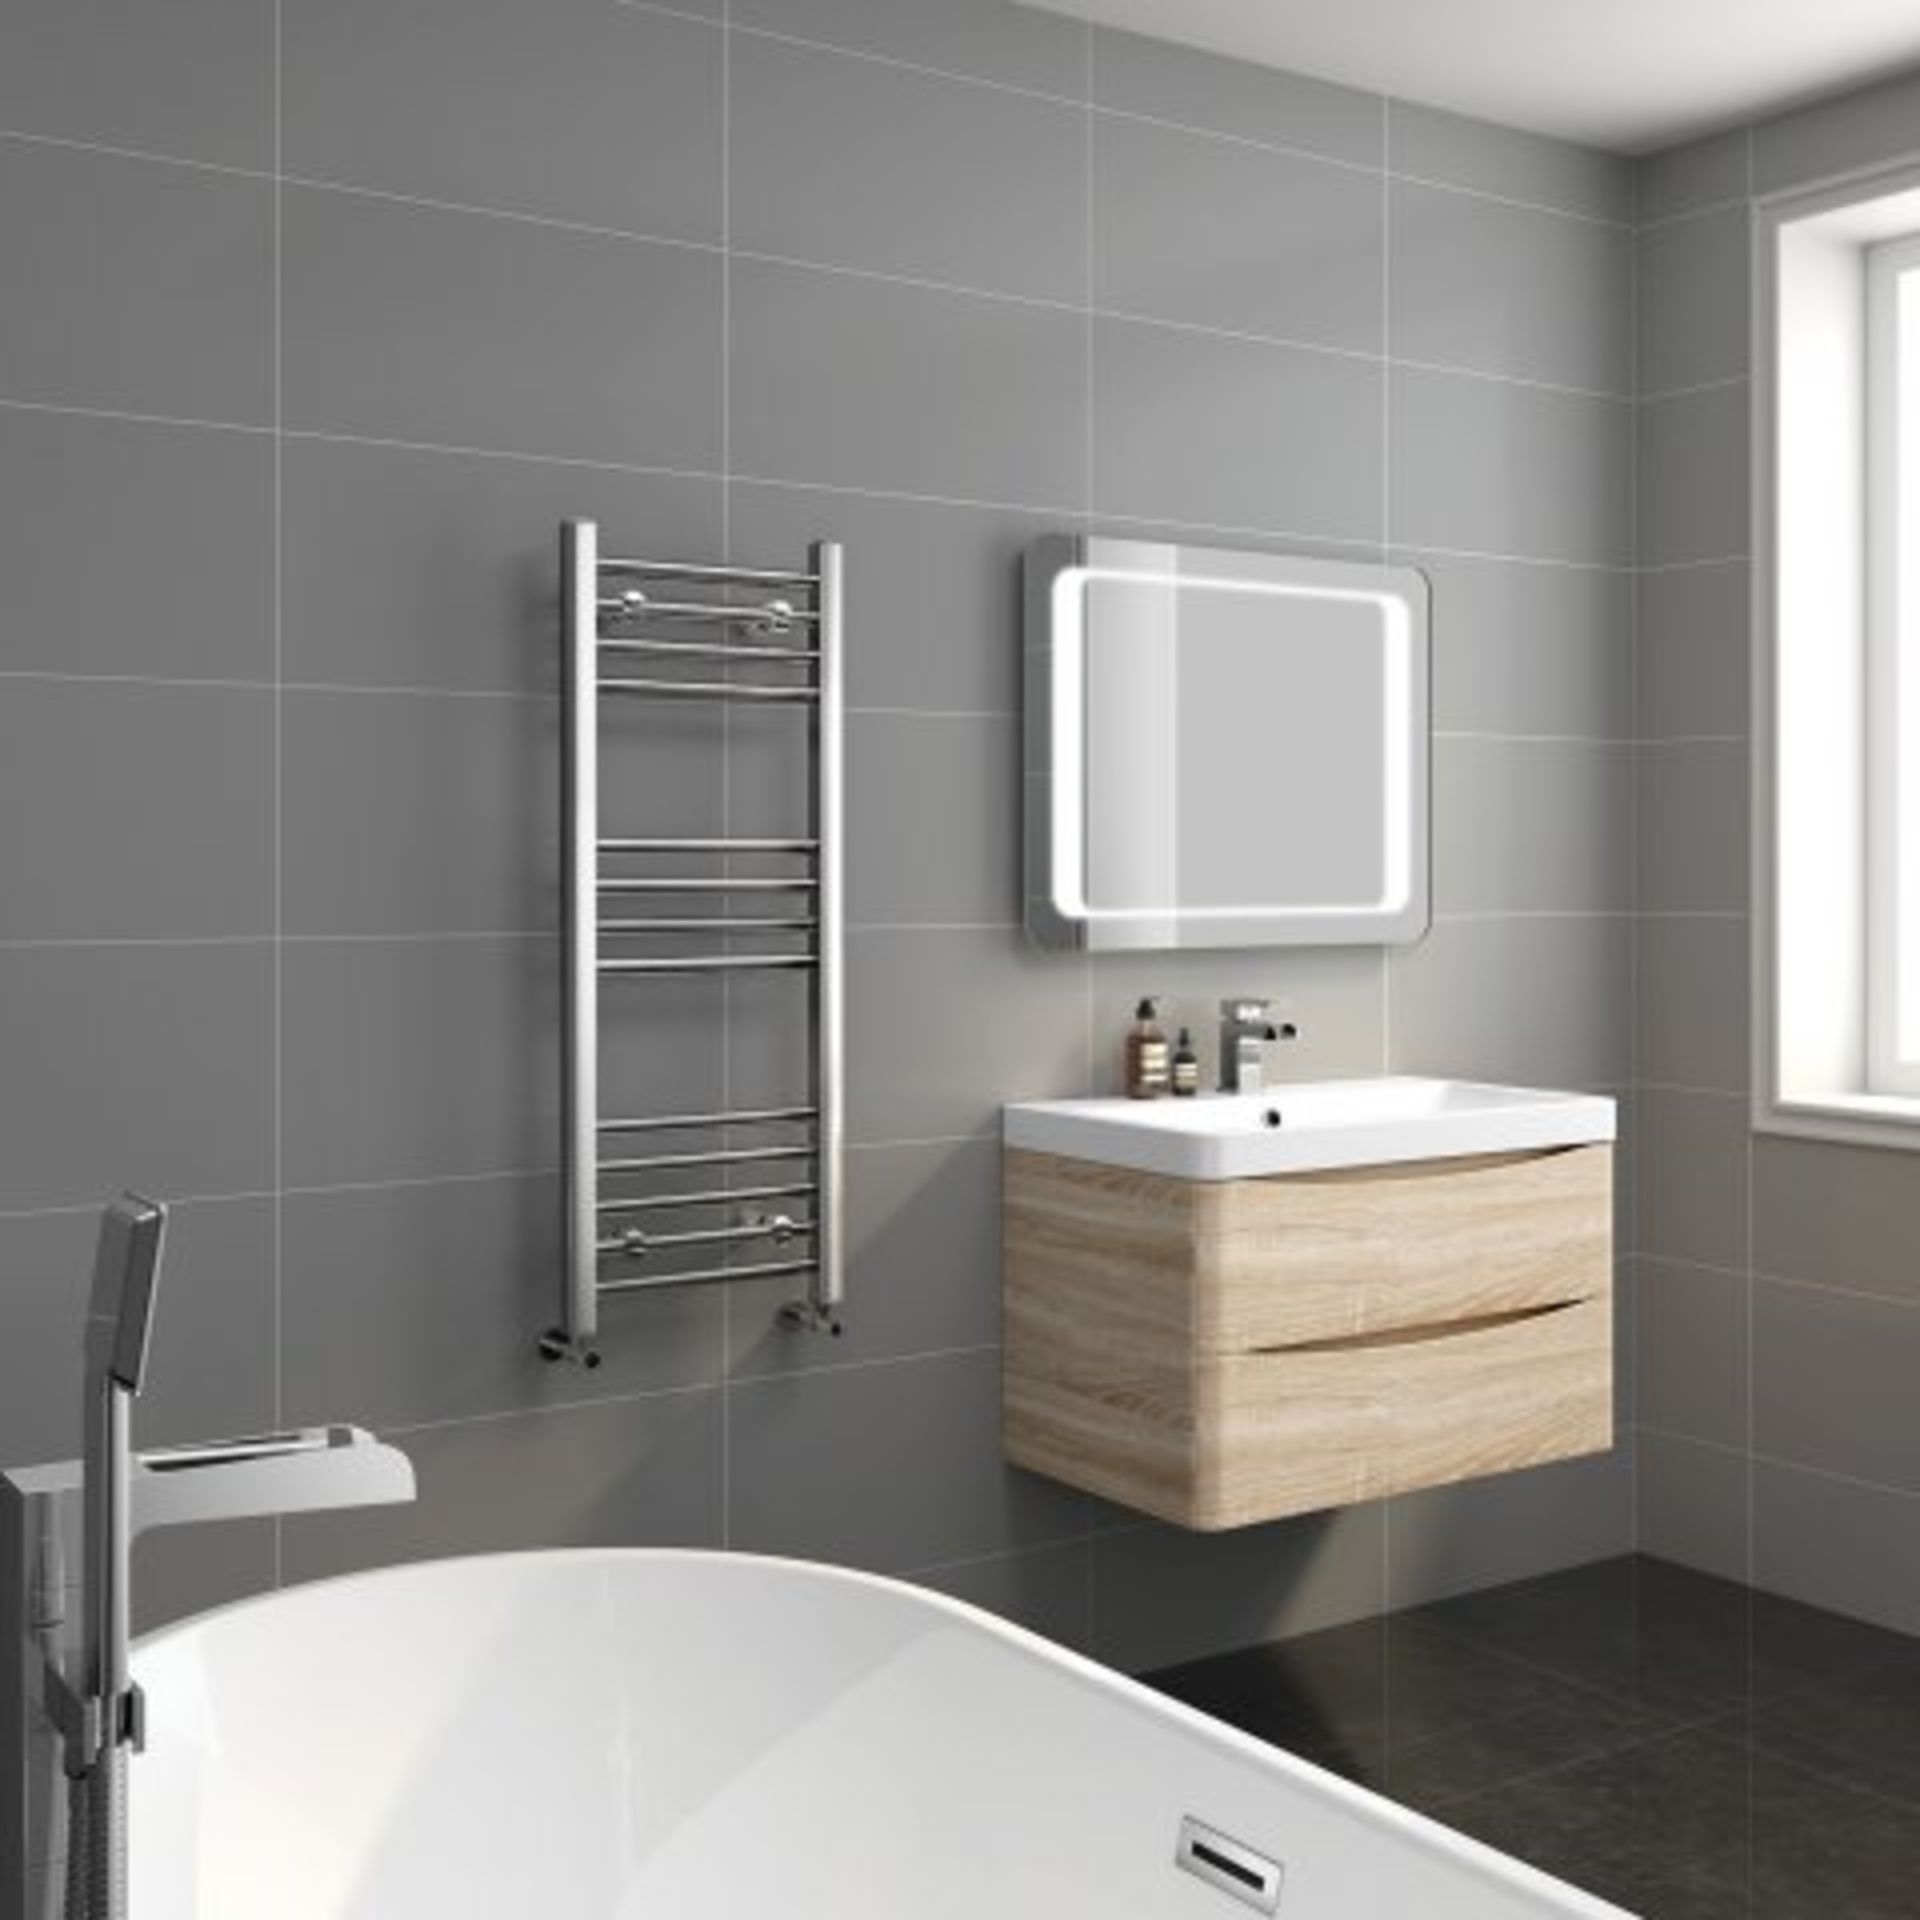 (A18) 1000x400mm - 20mm Tubes - Chrome Heated Straight Rail Ladder Towel Radiator Designer Touch For - Image 2 of 7